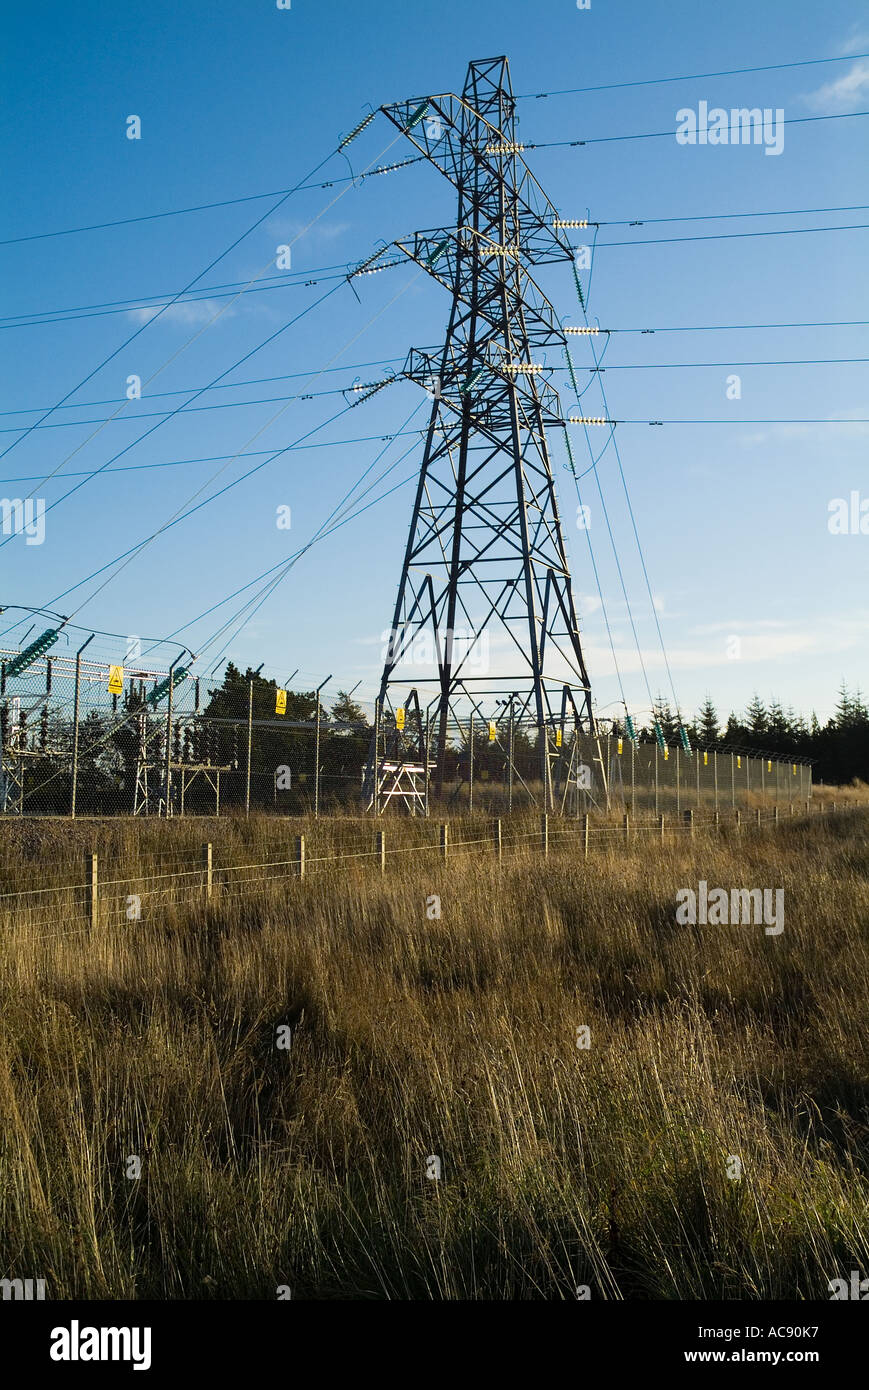 dh Achkeepster substation ELECTRICITY CAITHNESS Hydro Electric pylon electrical uk energy supply scottish power national grid electricity lines Stock Photo